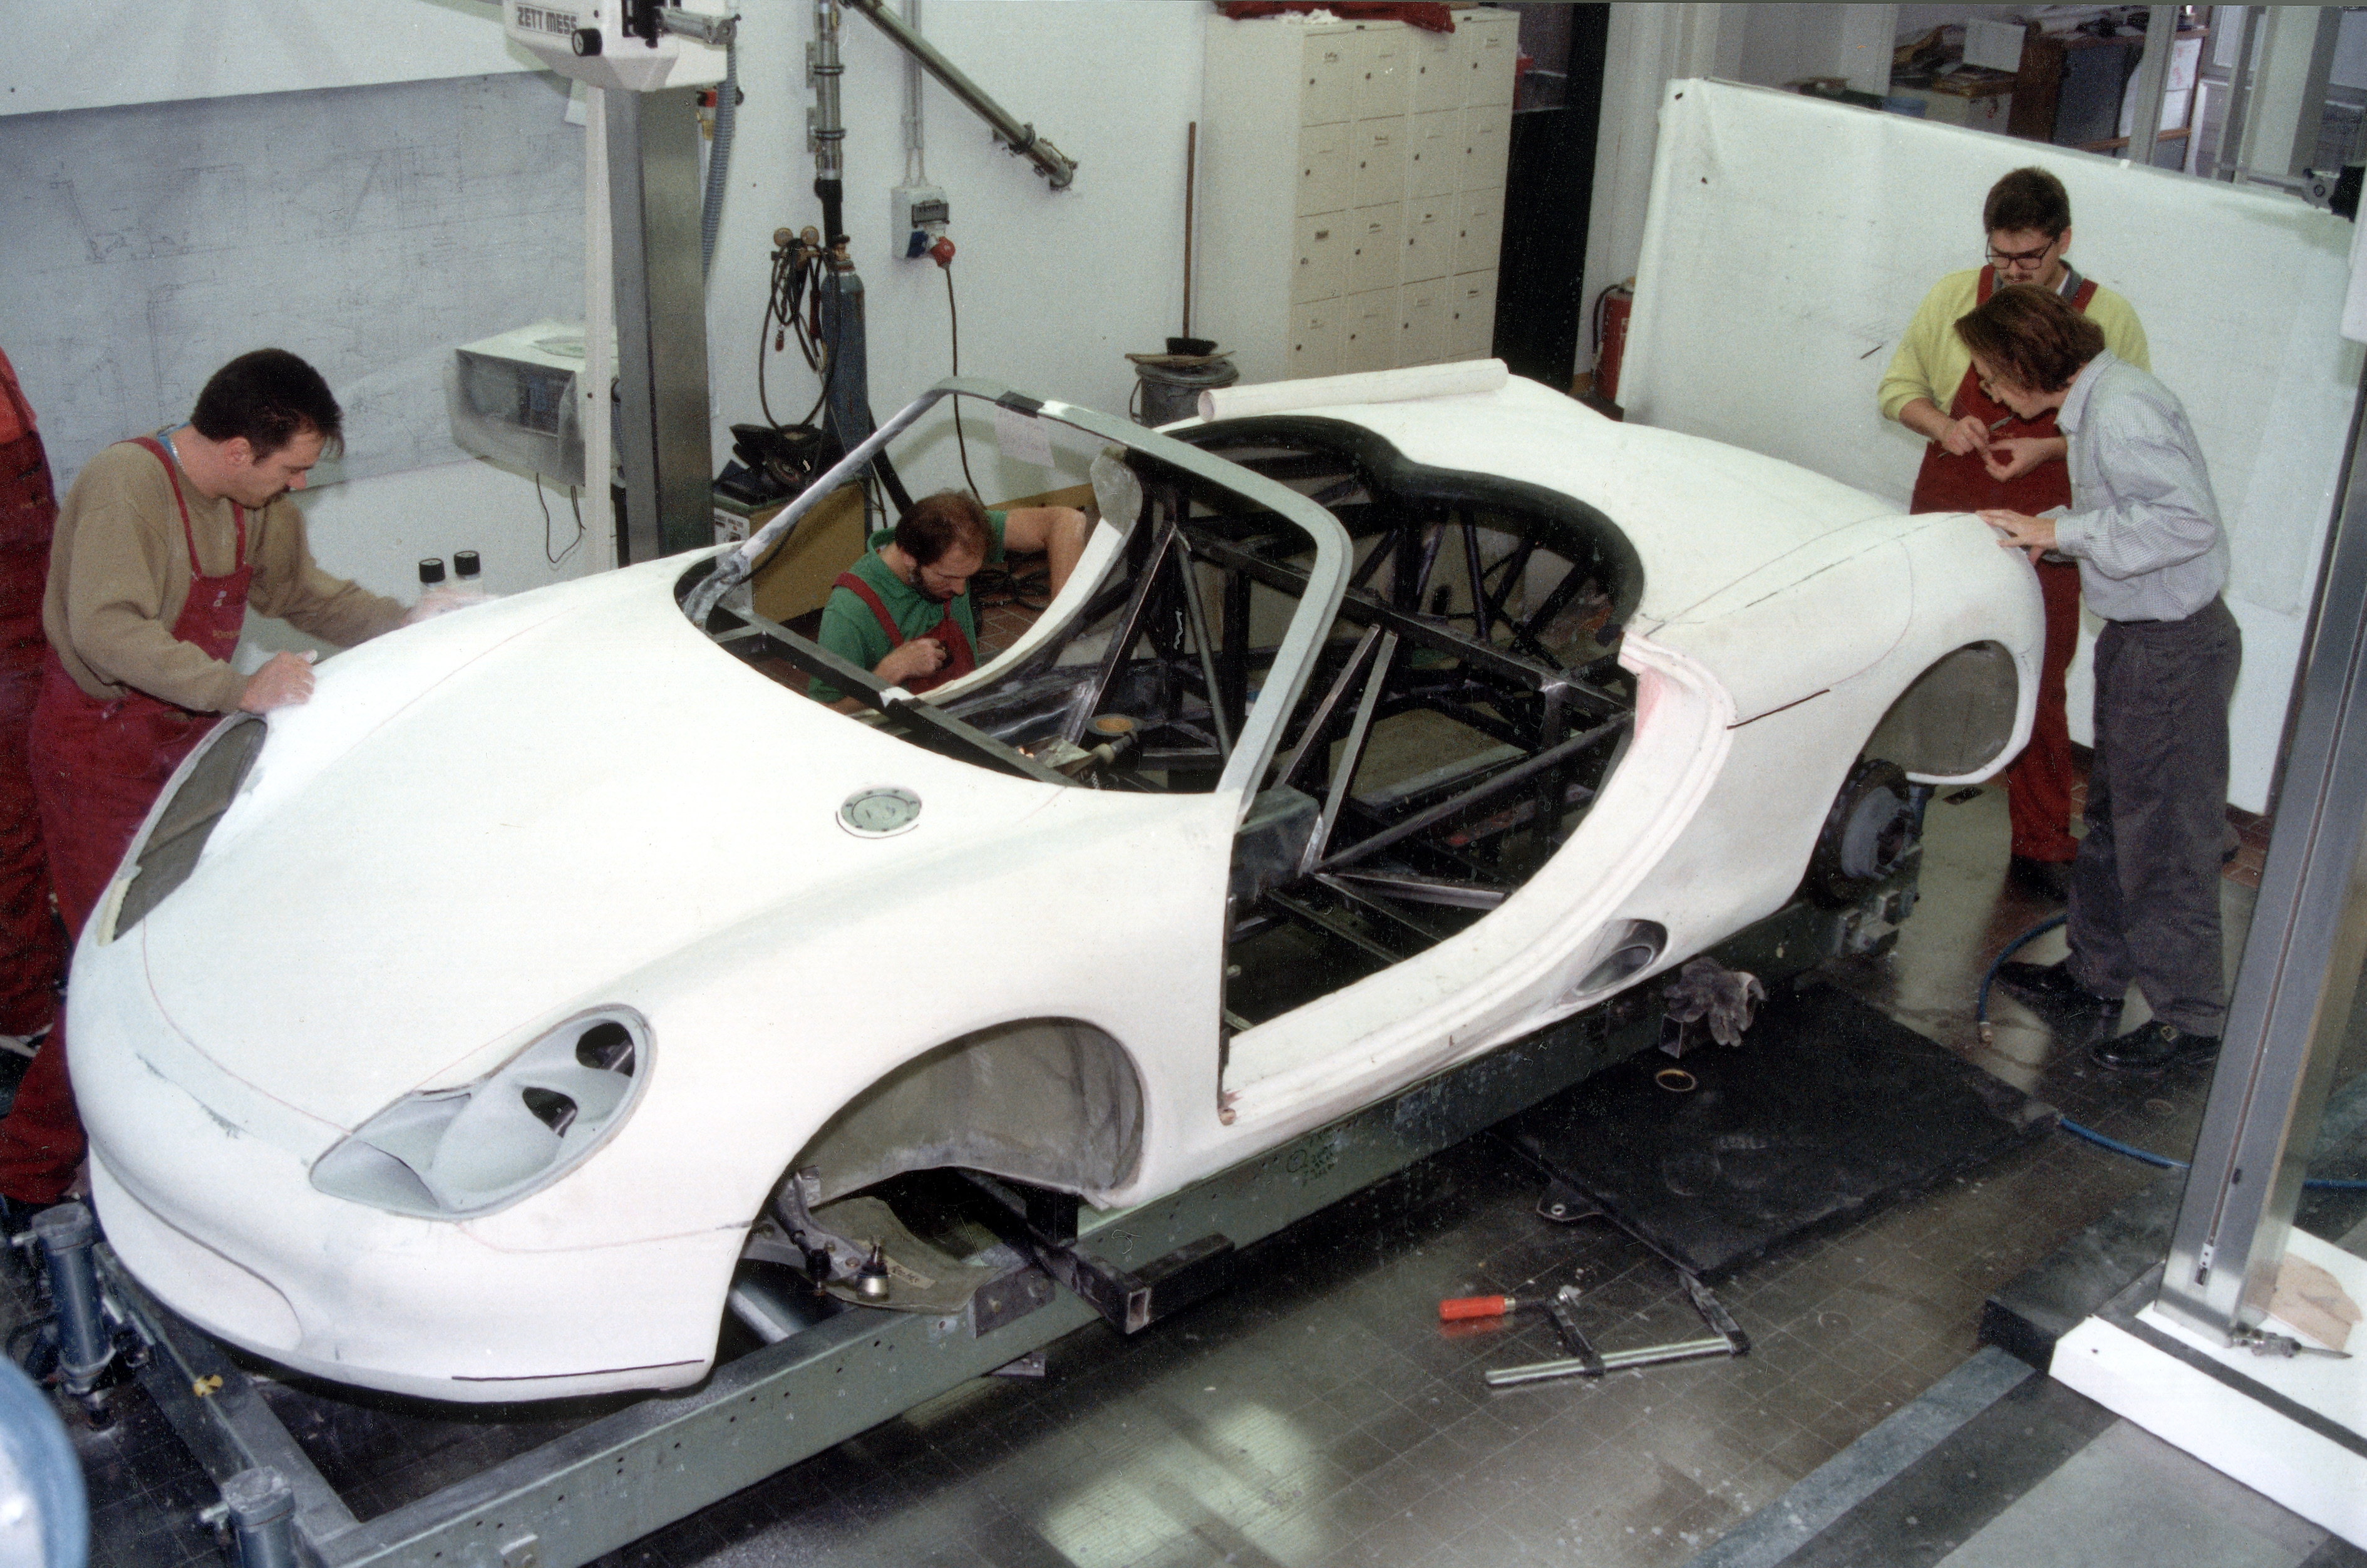 Engineers and designers working on Boxster concept in the workshop